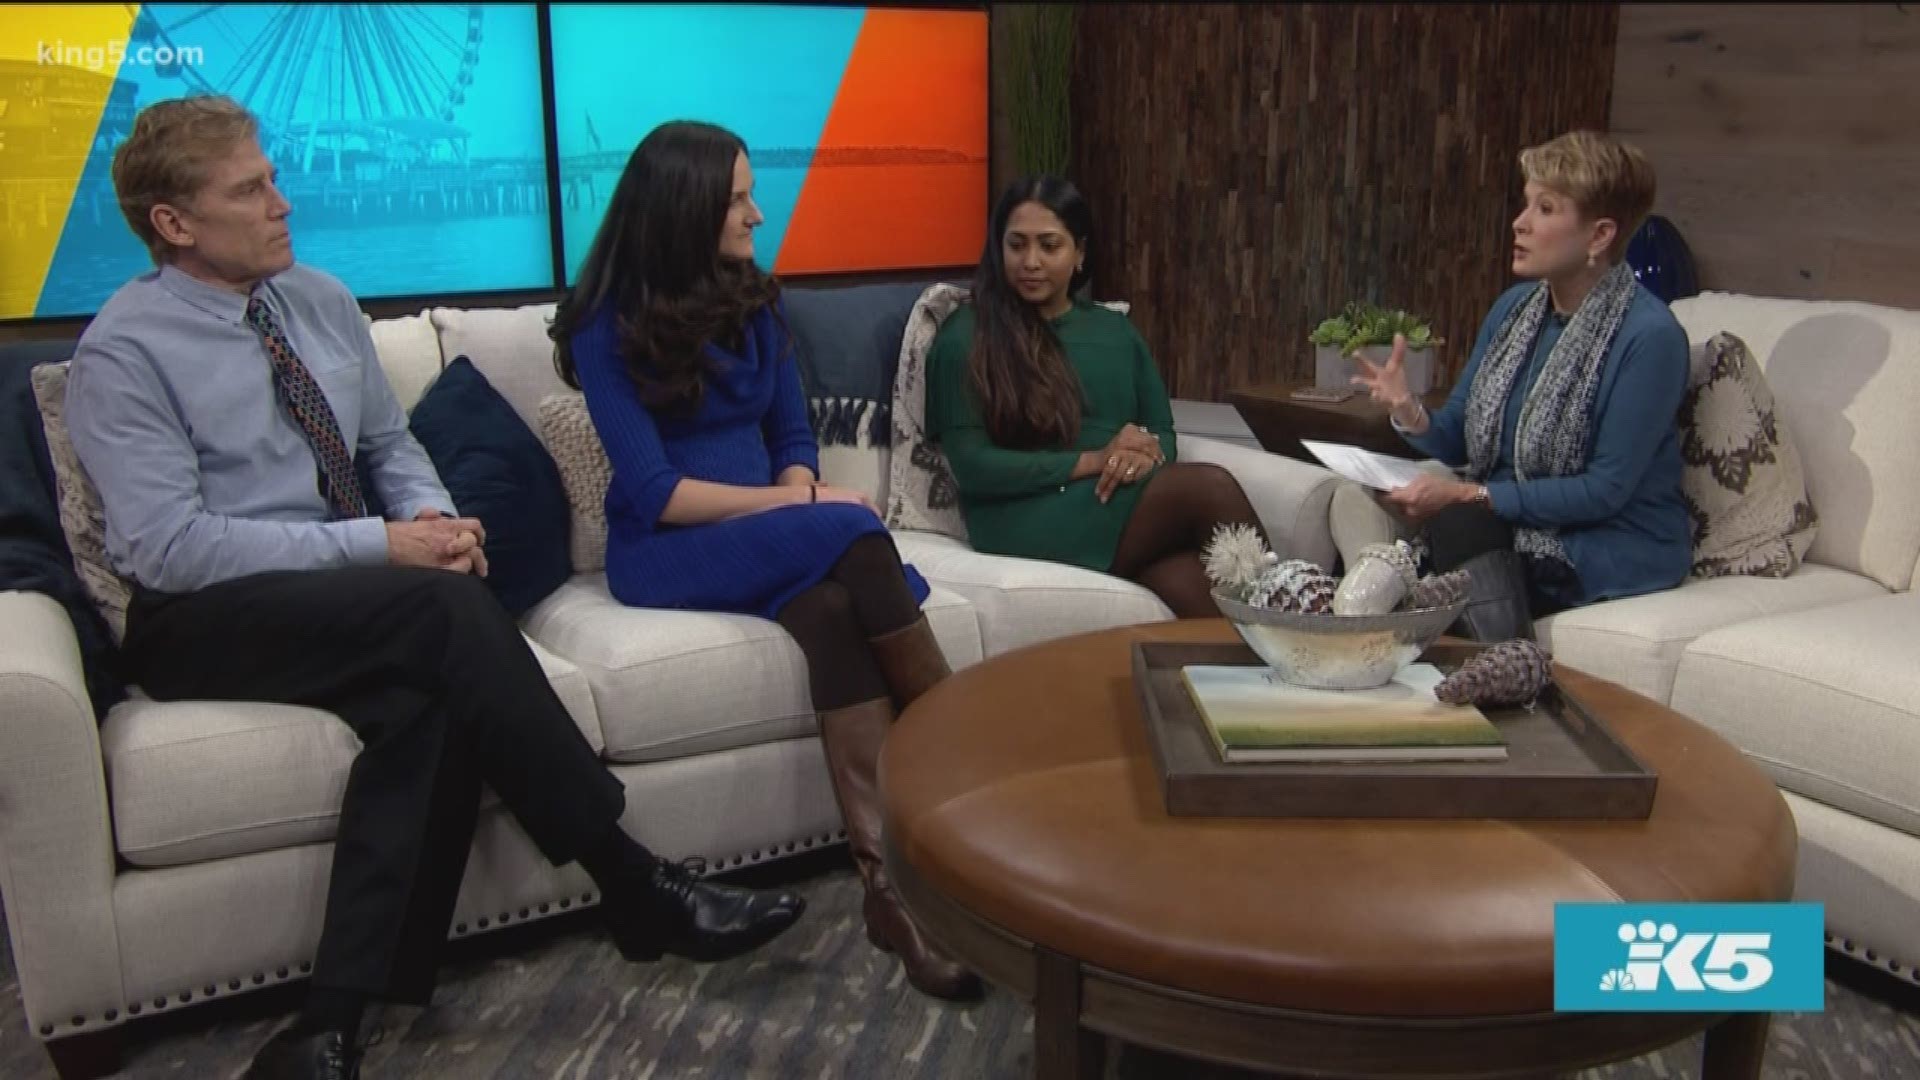 Guests Lisa Arnold, Dr Venuka Wickramaarachchi and Dr. Robert Huizenga offer their wellness advice.